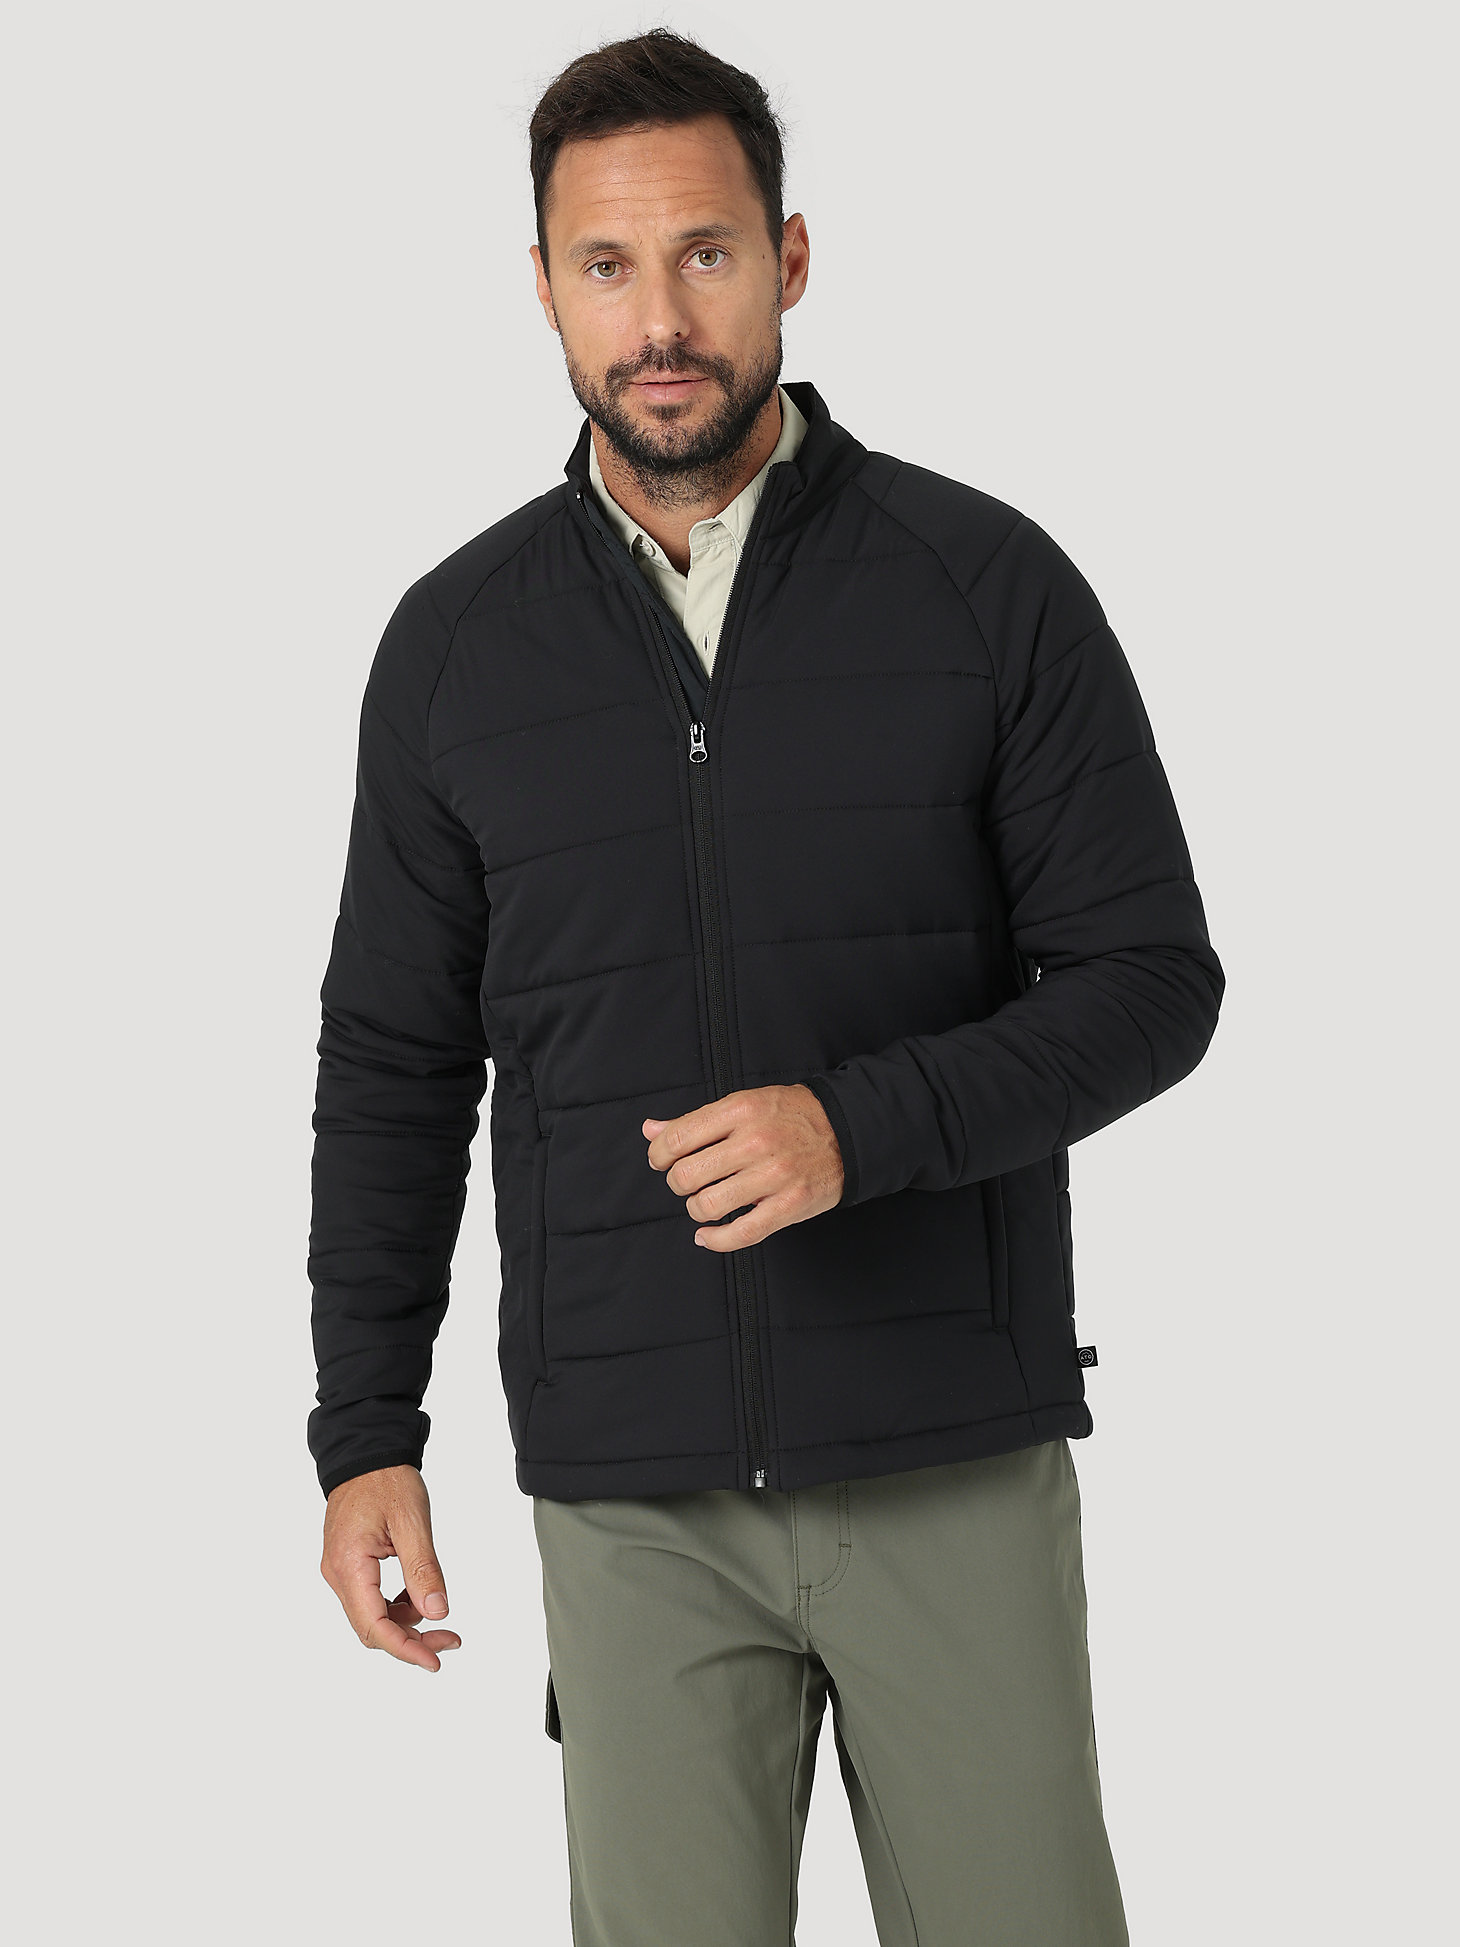 ATG By Wrangler™ Men's Mid Layer Jacket in Jet Black main view